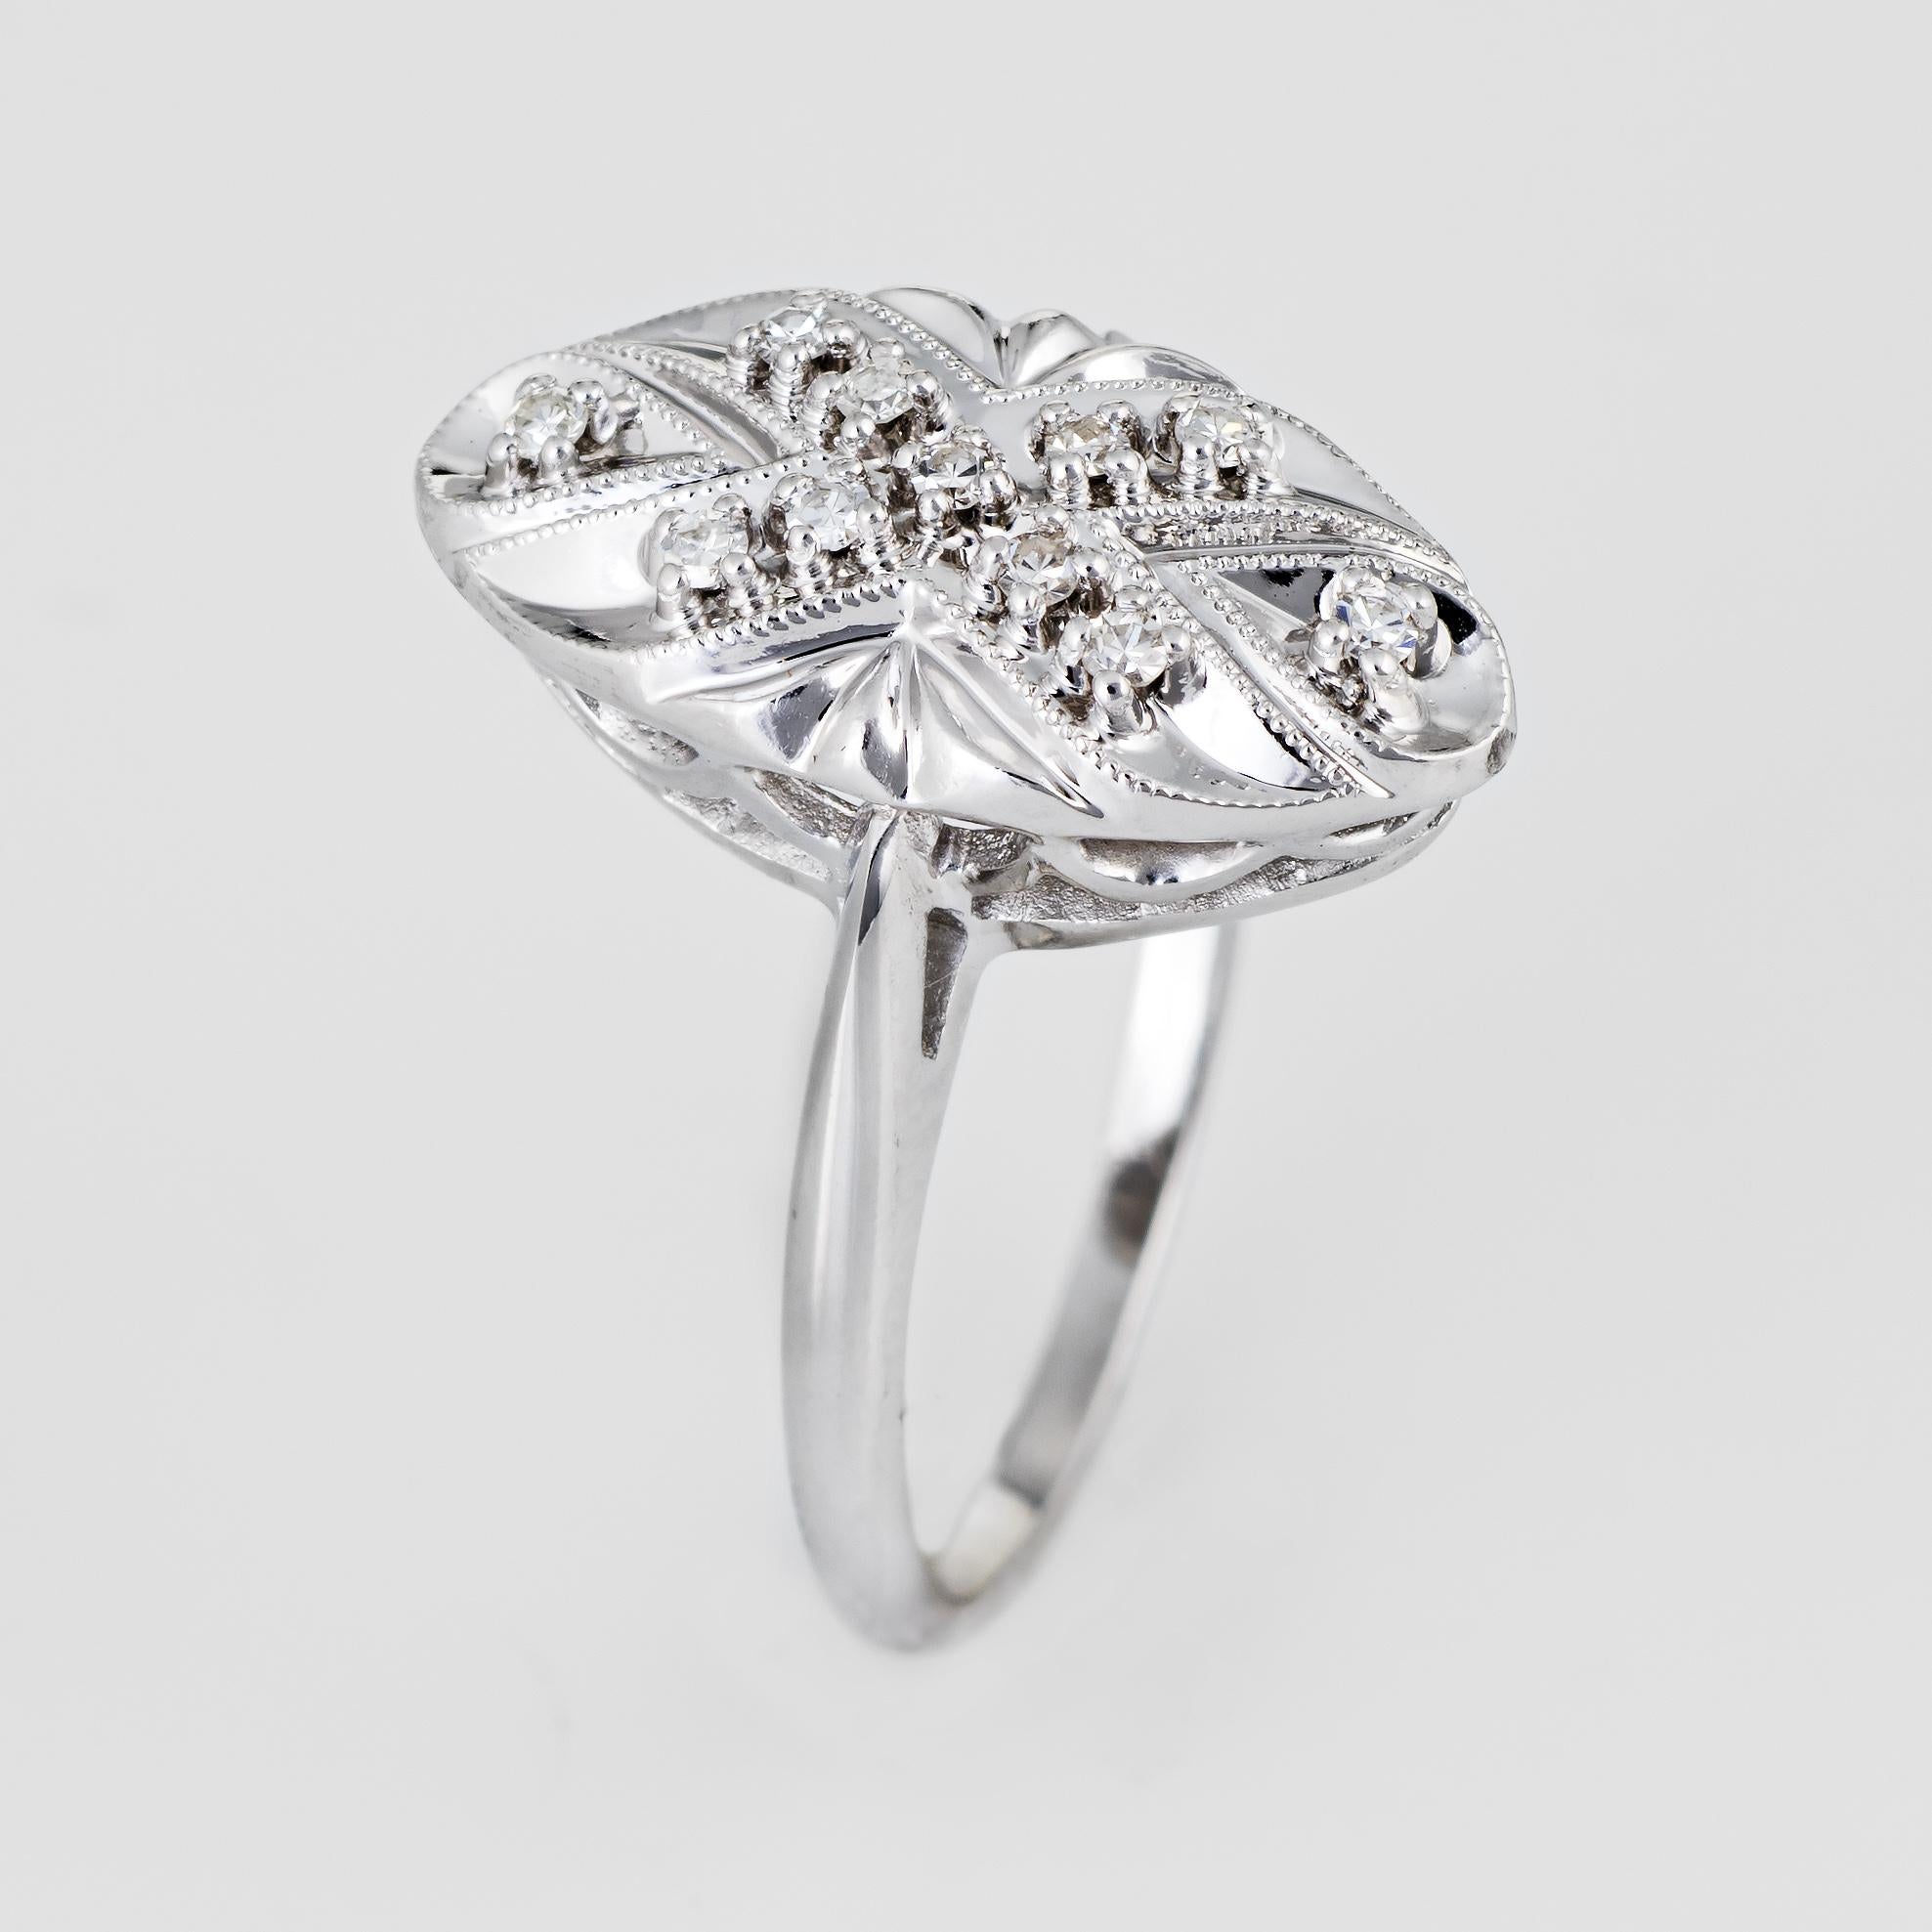 Stylish vintage diamond navette ring (circa 1950s to 1960s) crafted in 14 karat white gold. 

11 estimated 0.01 carat single cut diamonds total an estimated 0.11 carats (estimated at I-J color and SI1-I1 clarity). 

The navette ring is set with